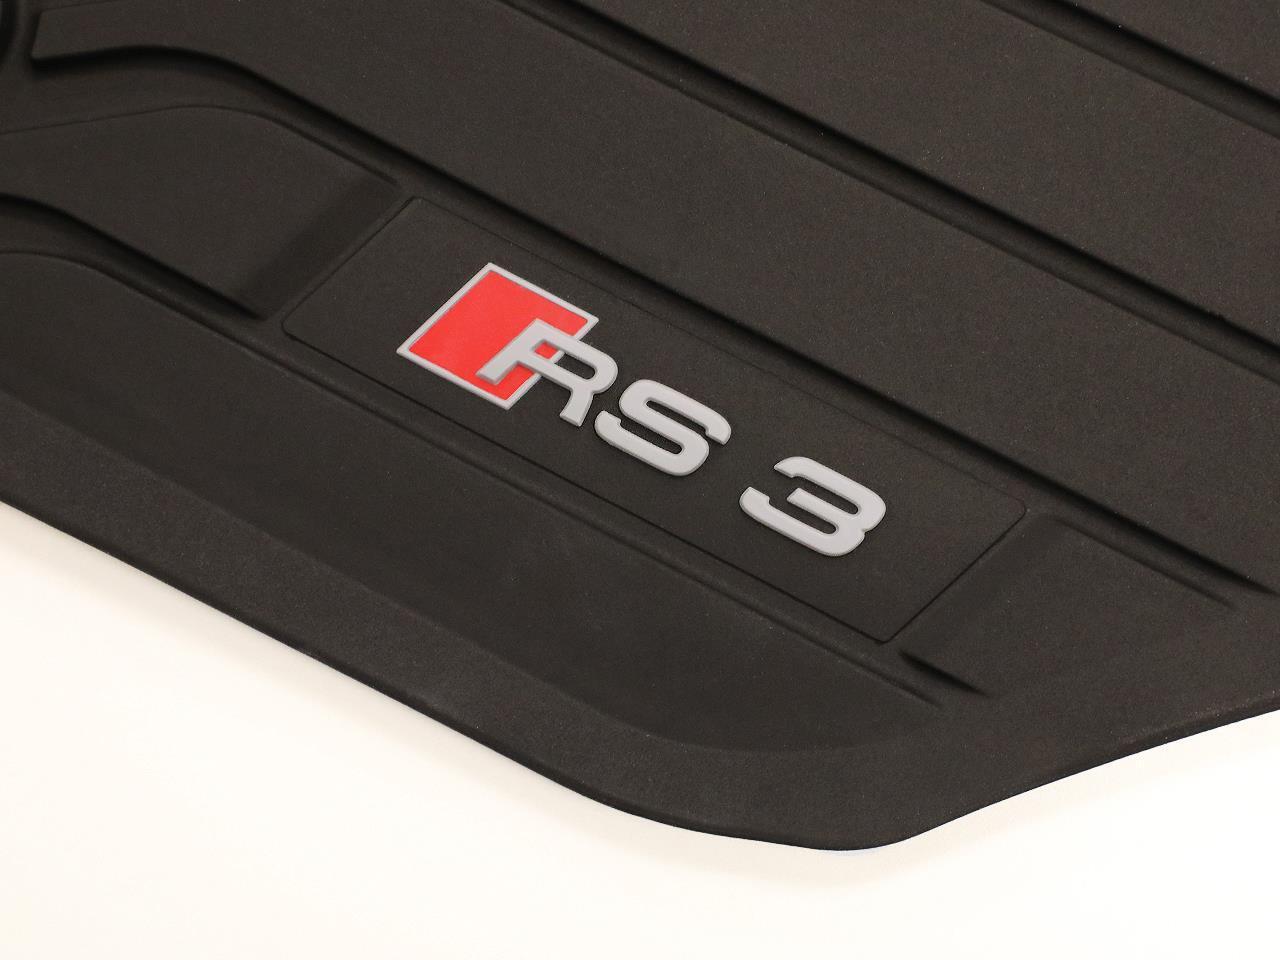 Audi RS3 (2017-2018) Genuine Factory OEM Accessory Rubber Floor Mats - SET OF 4